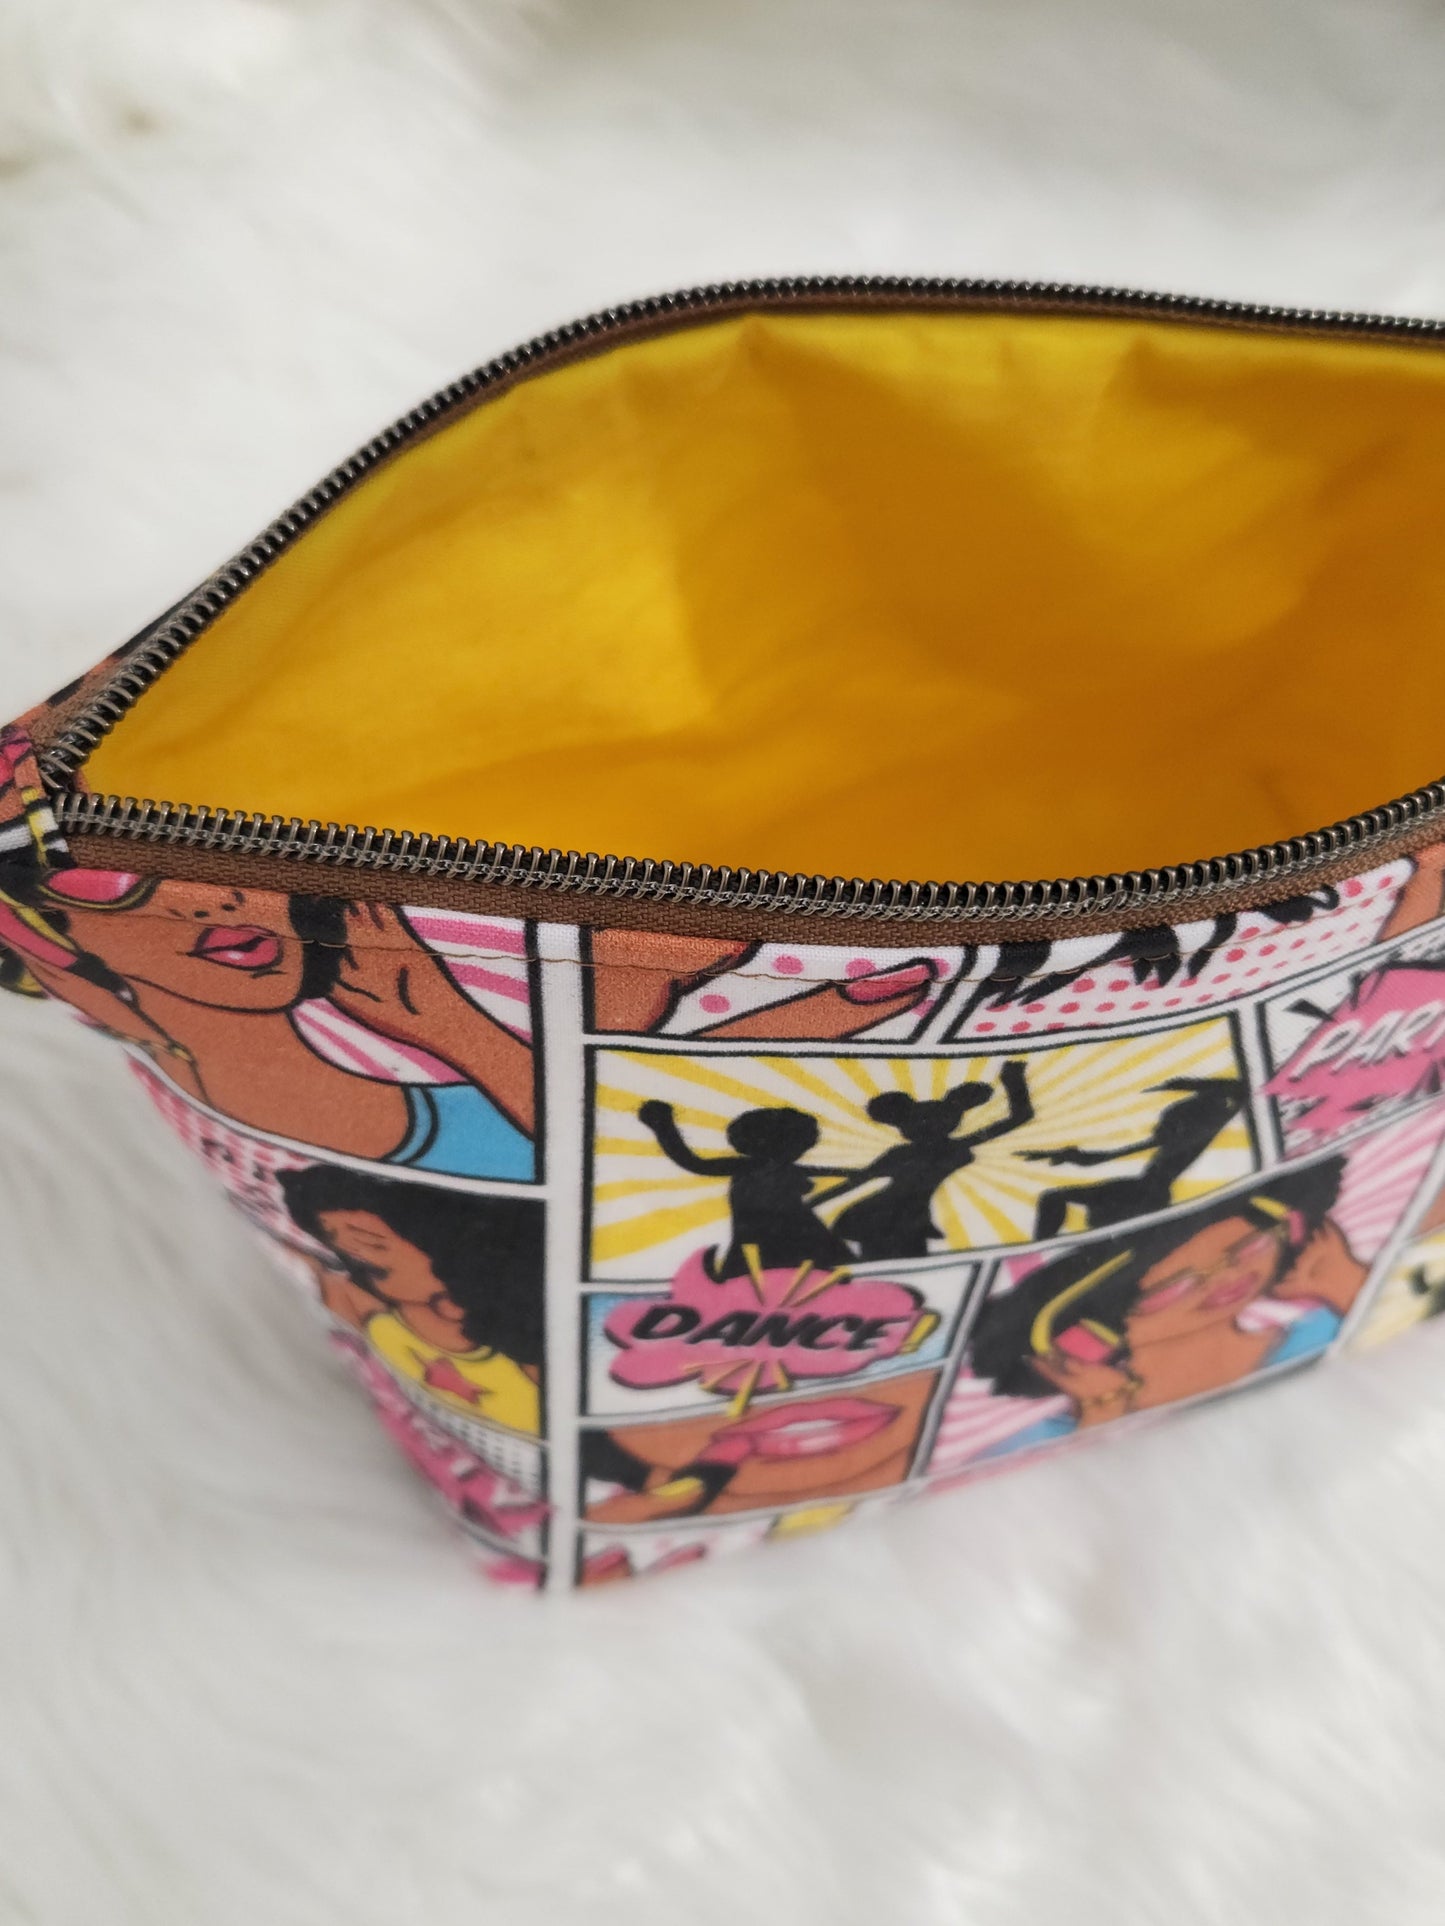 Large Zipper Pouch - Retro Party Girl